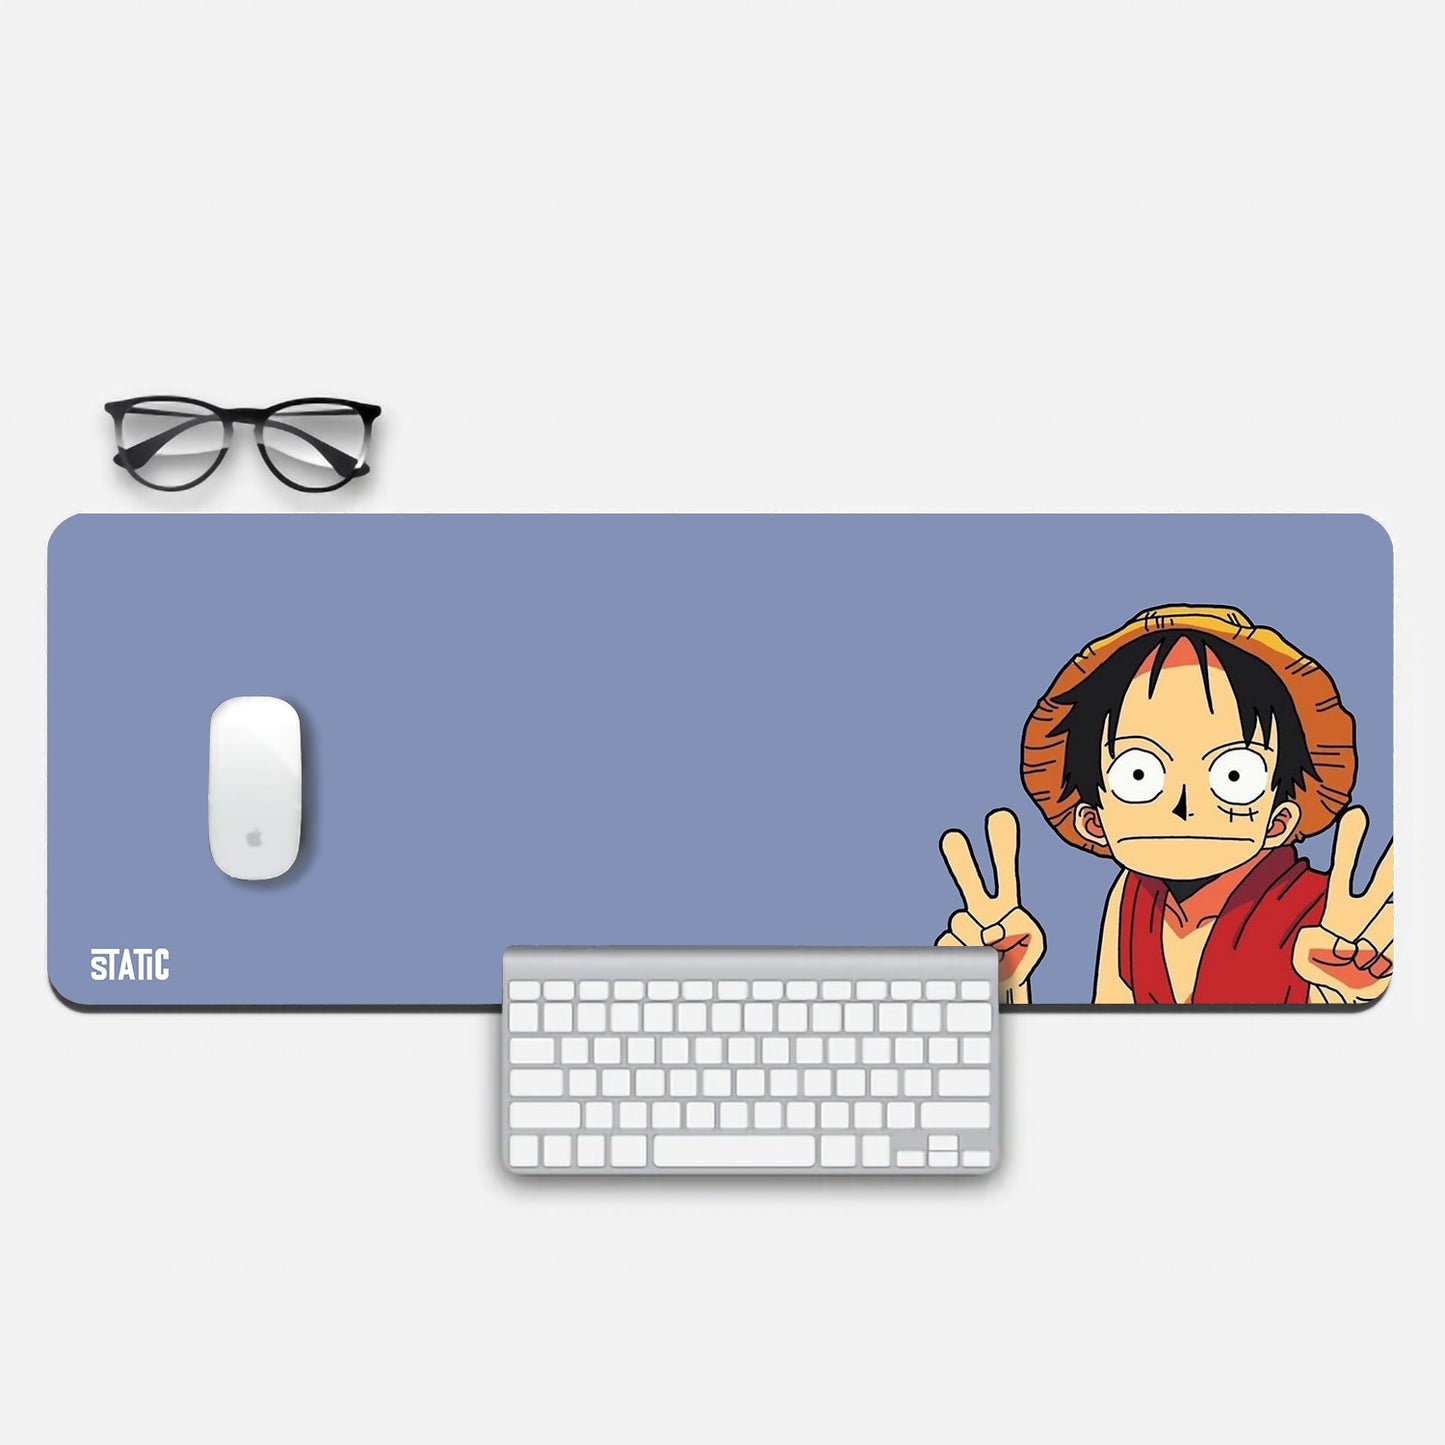 Boost your gaming setup with our Extended Gaming Mouse Pad showcasing Luffy from One Piece. Immerse yourself in the world of adventure with this fun-loving pirate. This spacious mouse pad offers both comfort and precision for your gaming needs. Bring the excitement of your favorite character to your desk. Level up your gear and conquer your games with style.